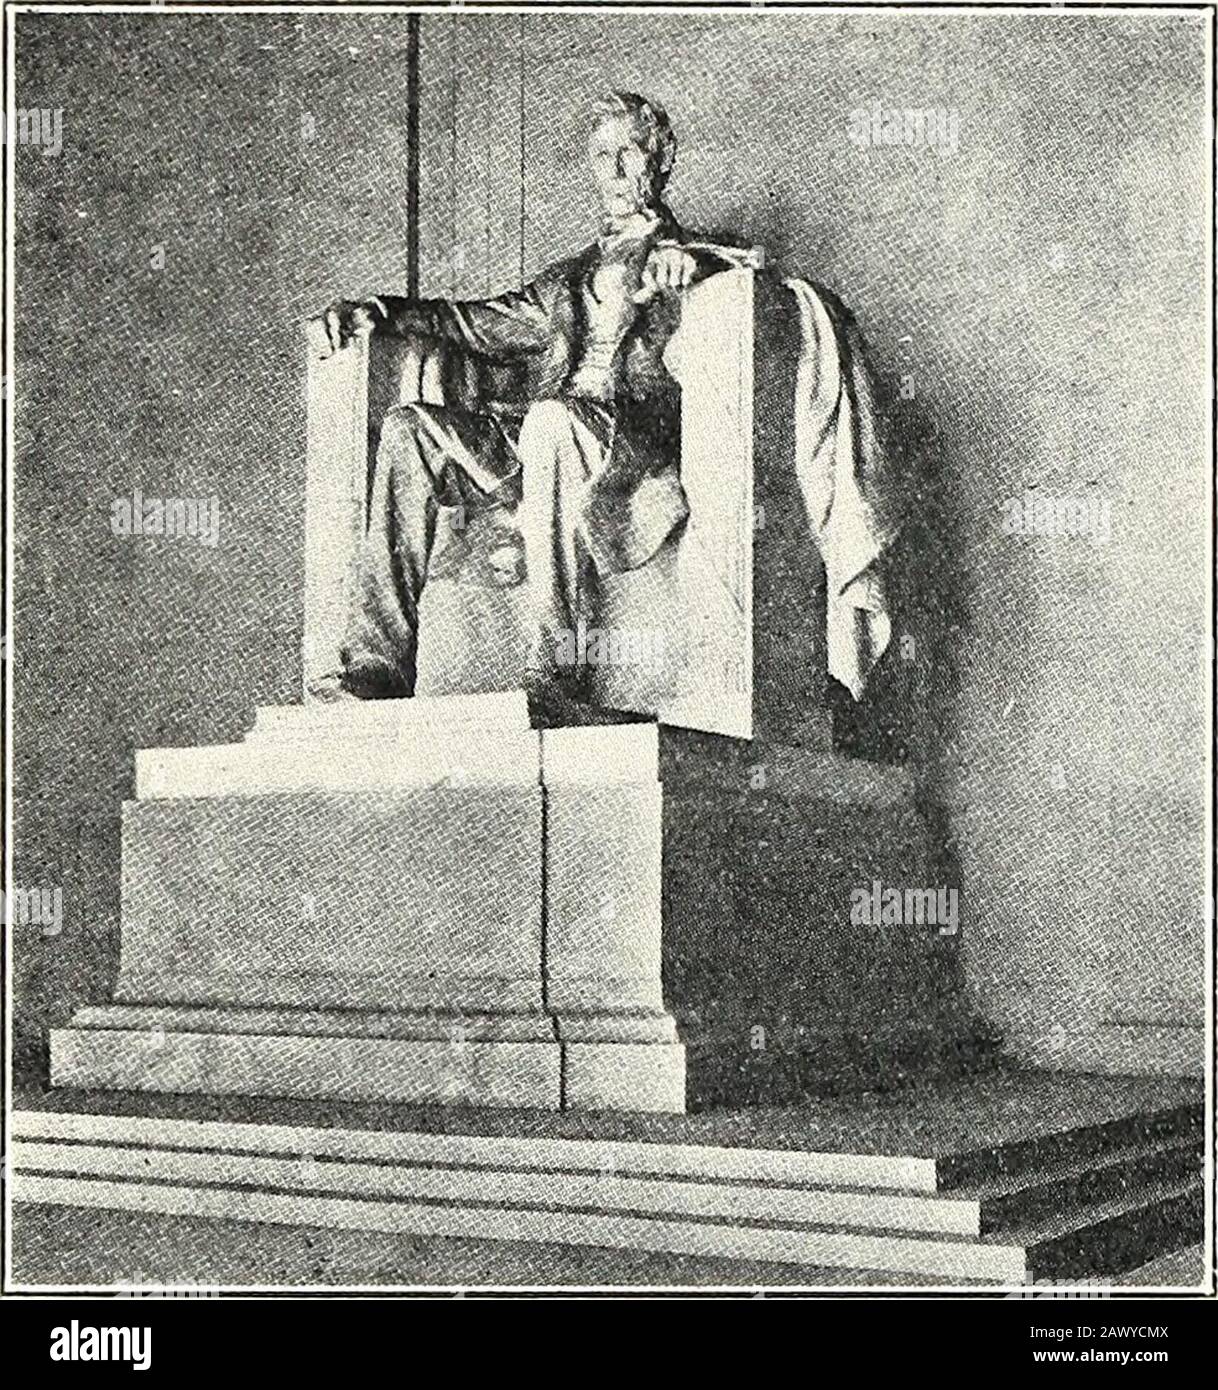 Statues Of Abraham Lincolnlincoln Memorial 3 Oh3 00 Lt 00 O N U S Brg 3r C Rt 3 On O 3 T S F15 K 3